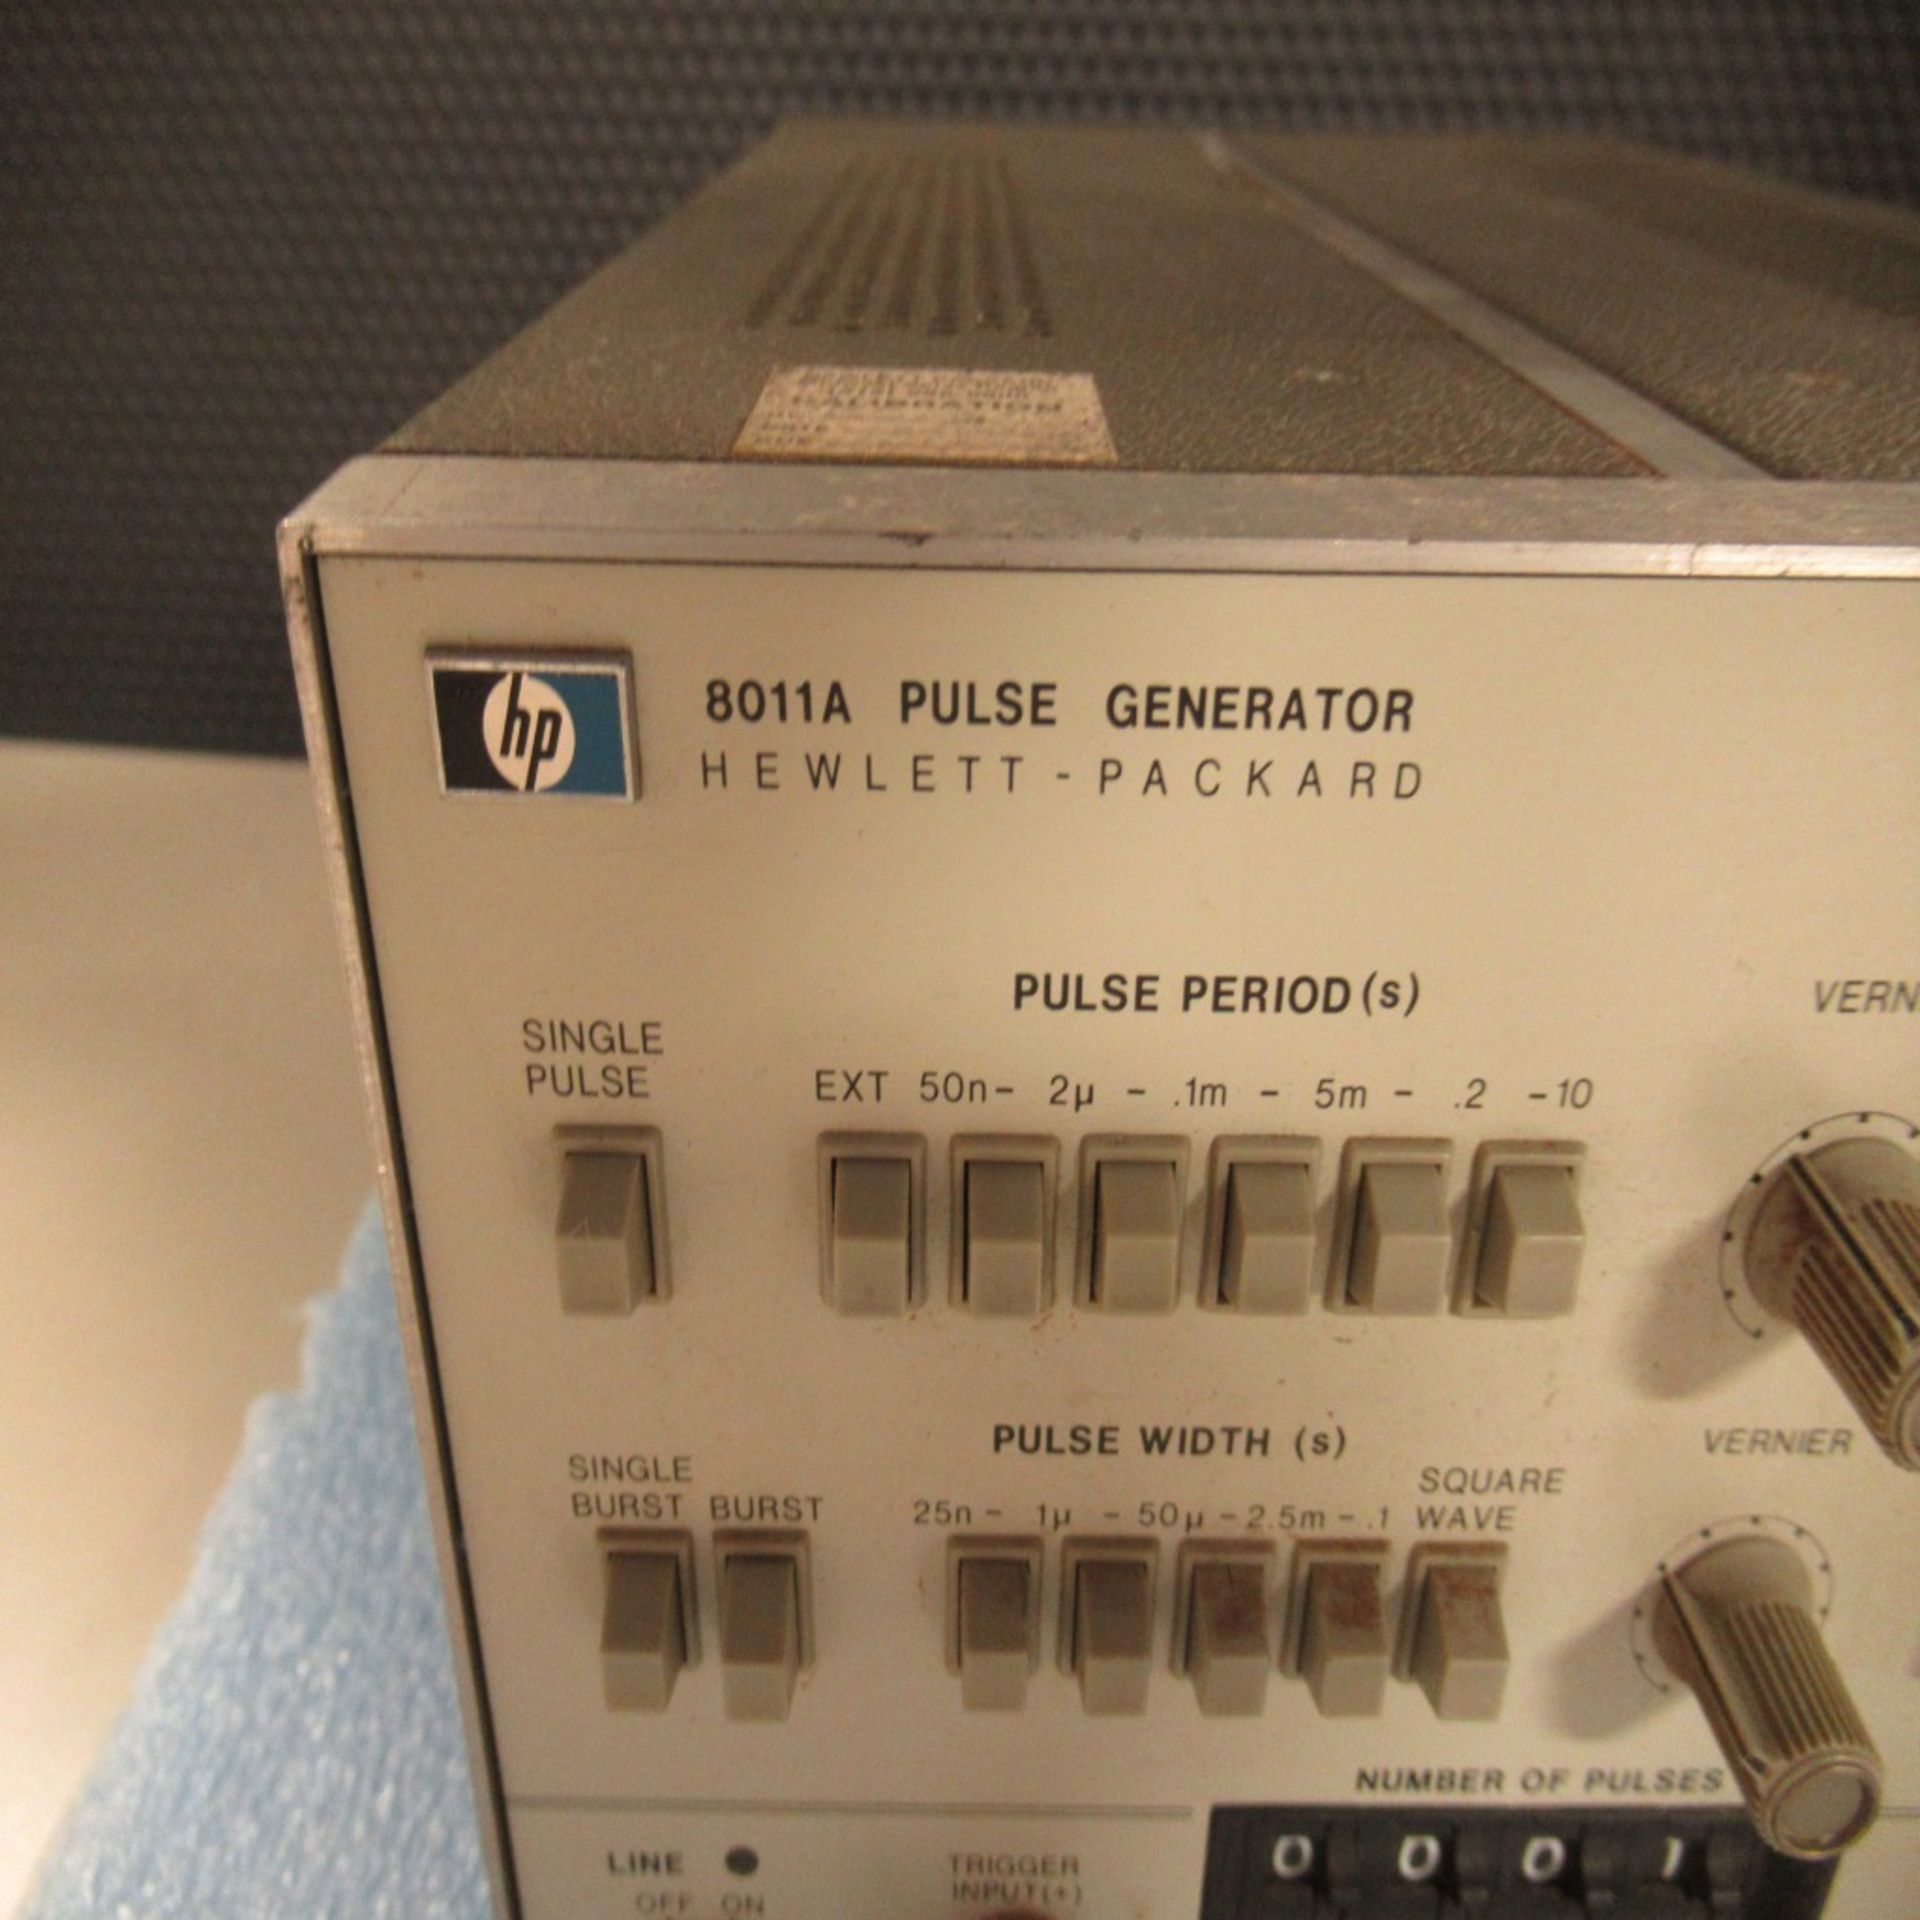 PHOTON SNAP SHOT MODEL 6000 *POWERS ON* NO SCREEN DISPLAY; FARNELL AP20-80 REGULATED POWER SUPPLY * - Image 98 of 222